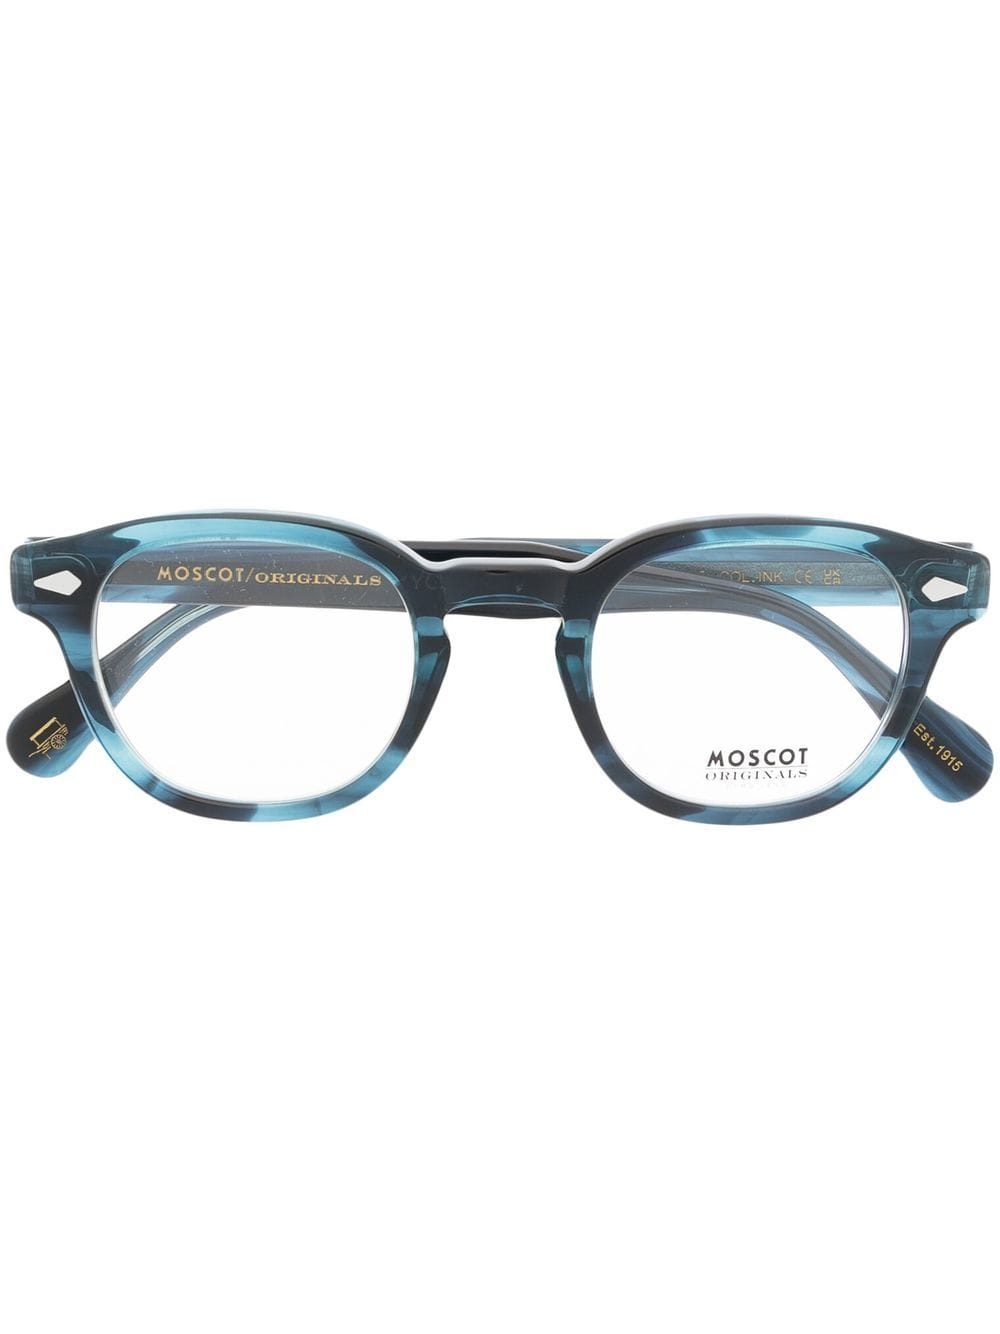 Moscot Lemtosh Glasses In Blue